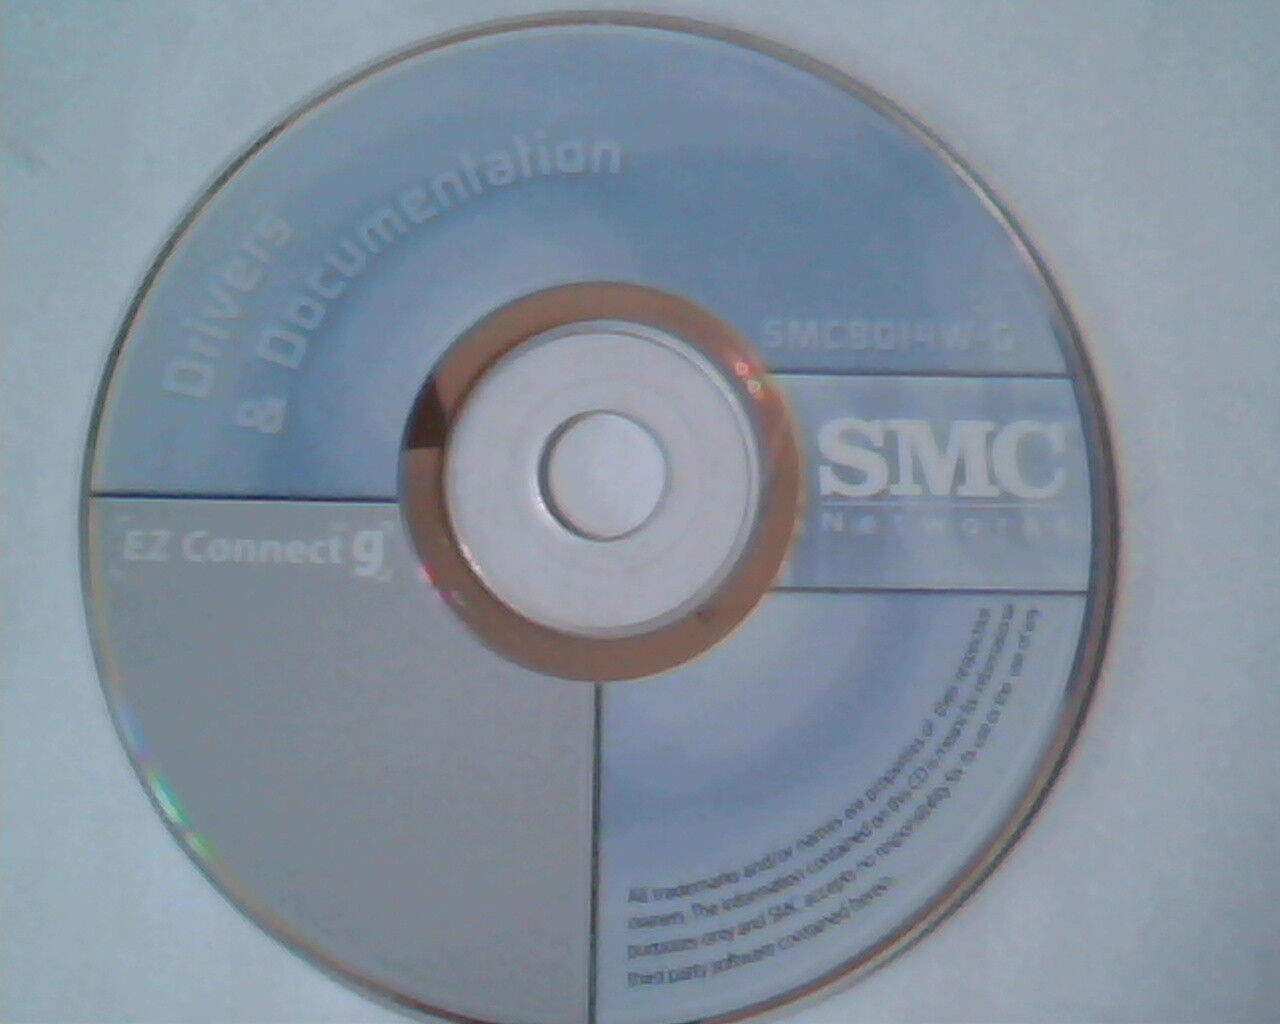 CD SMC Networks Drivers and Documentation SMC8014W-G EZ connect g